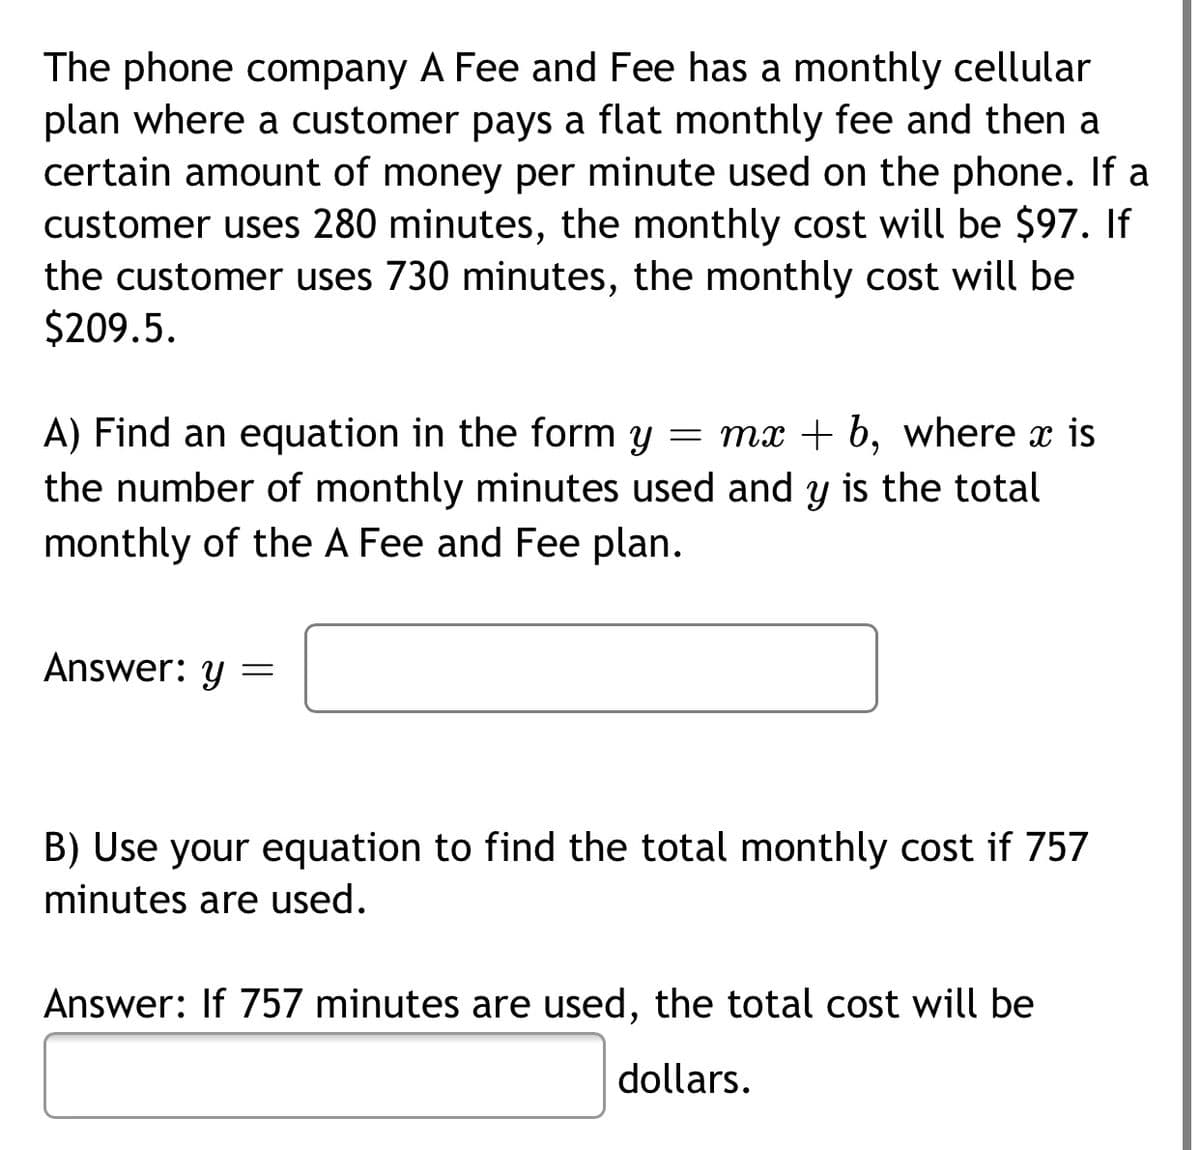 The phone company A Fee and Fee has a monthly cellular
plan where a customer pays a flat monthly fee and then a
certain amount of money per minute used on the phone. If a
customer uses 280 minutes, the monthly cost will be $97. If
the customer uses 730 minutes, the monthly cost will be
$209.5.
A) Find an equation in the form y = mx + b, where x is
the number of monthly minutes used and y is the total
monthly of the A Fee and Fee plan.
Answer: y
B) Use your equation to find the total monthly cost if 757
minutes are used.
Answer: If 757 minutes are used, the total cost will be
dollars.
